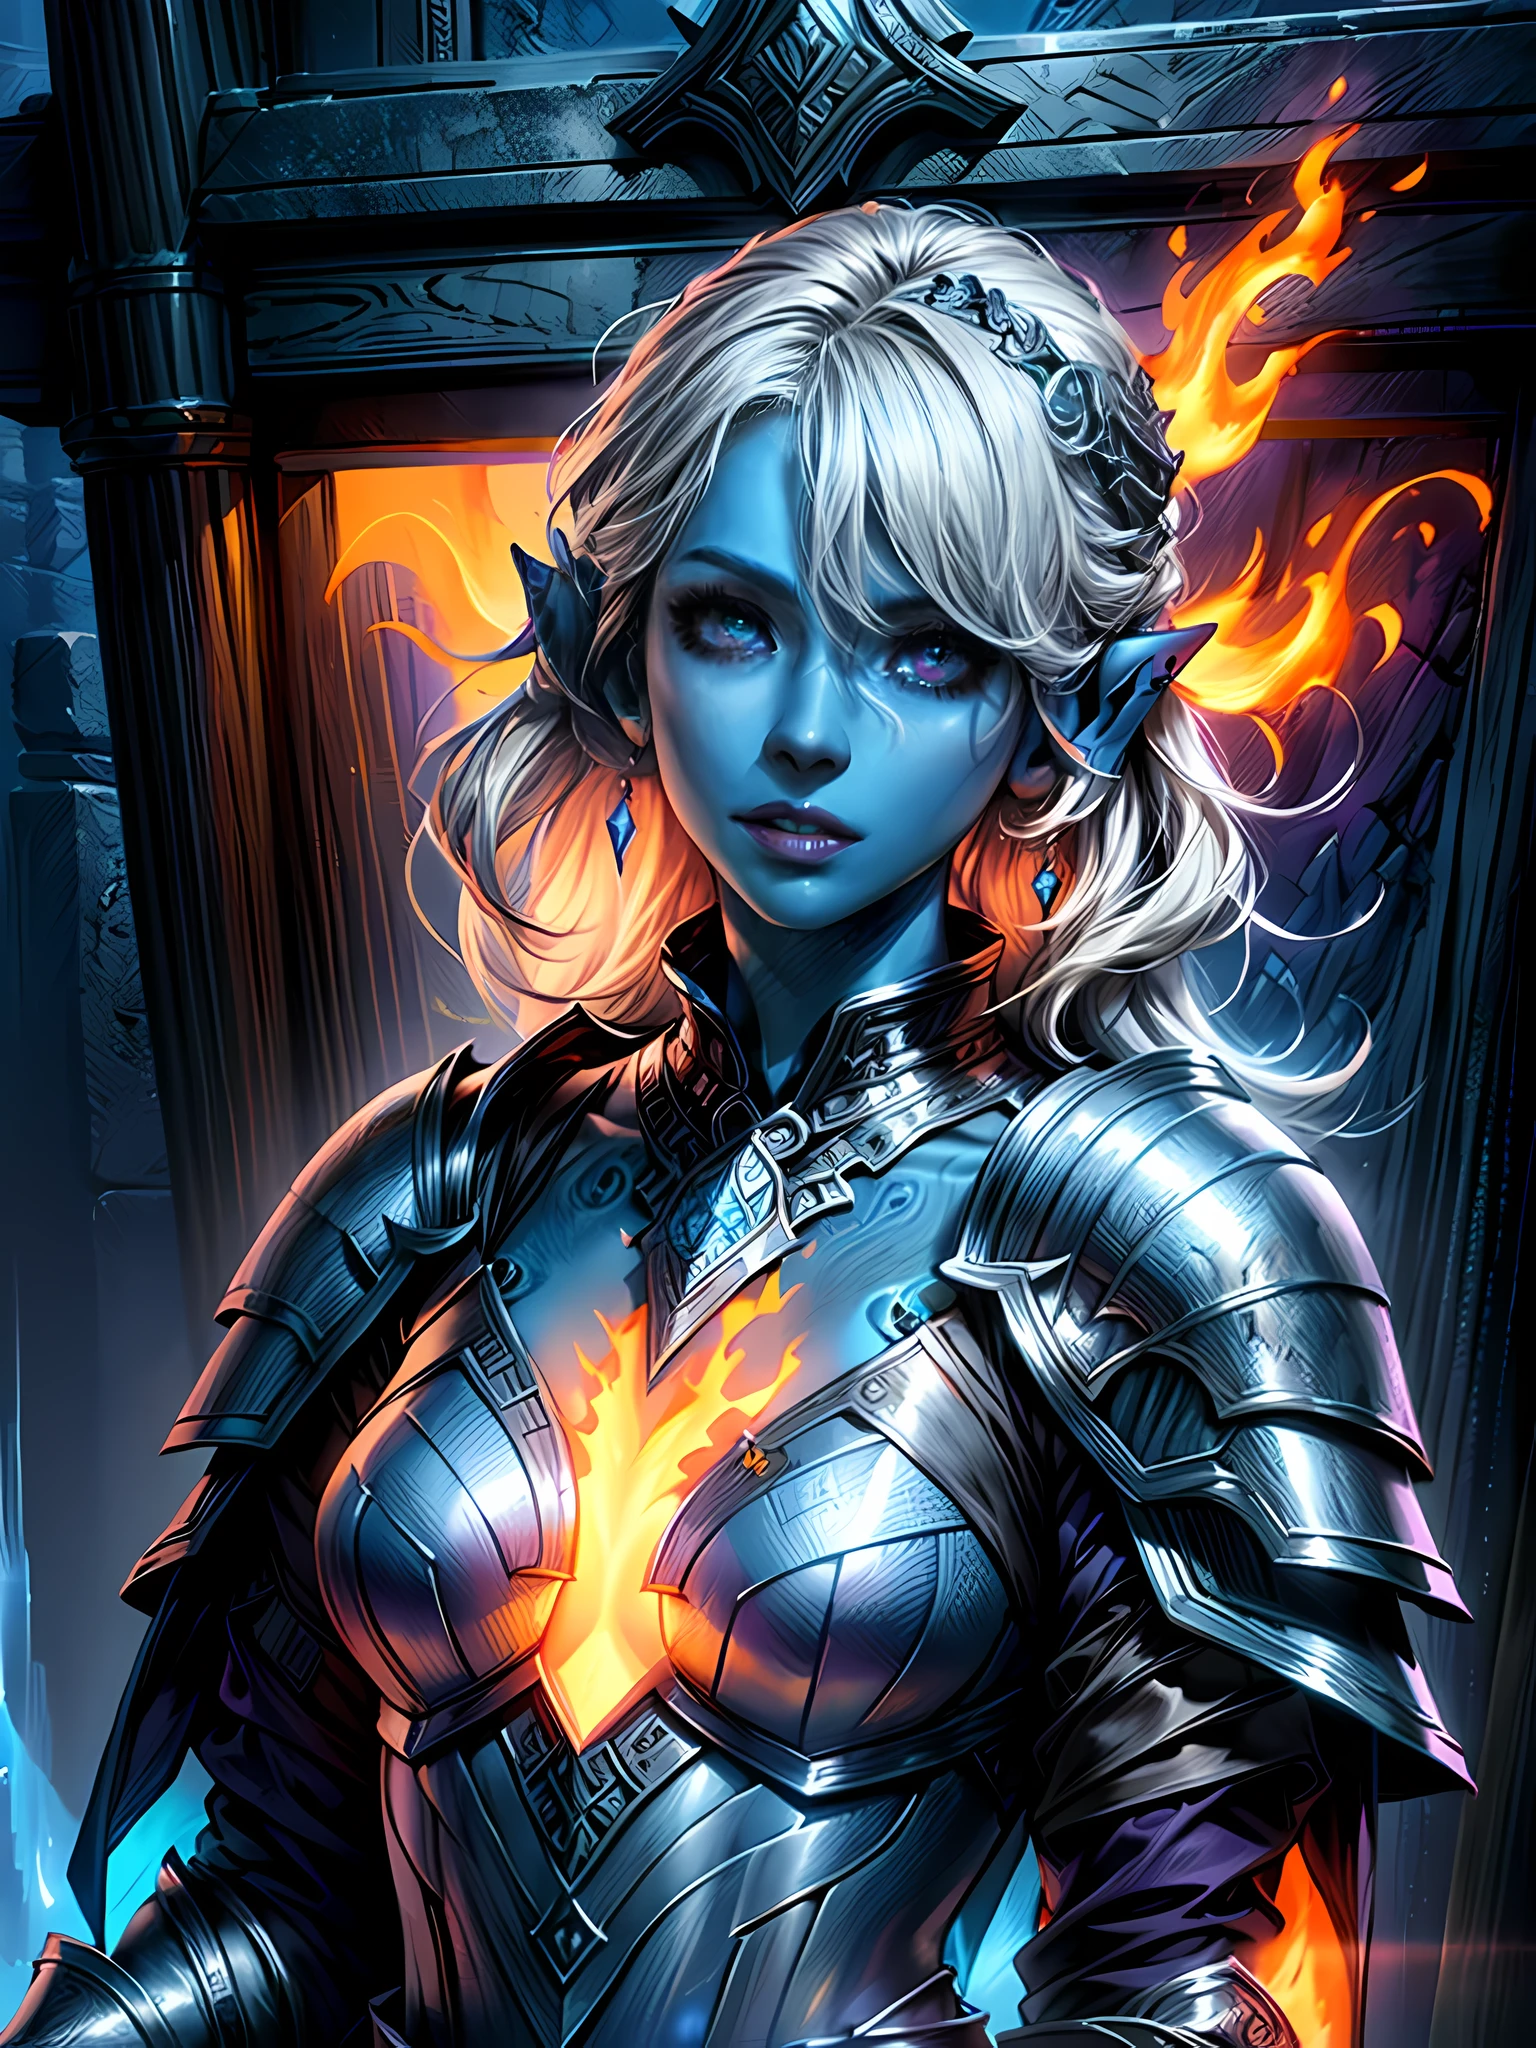 fantasy art, dnd art, RPG art, wide shot, (masterpiece: 1.4) a (portrait: 1.3) intense details, highly detailed, photorealistic, best quality, highres, portrait a female (fantasy art, Masterpiece, best quality: 1.3) ((blue skin: 1.5)), intense details facial details, exquisite beauty, (fantasy art, Masterpiece, best quality) cleric, (blue: 1.3) skinned female, (white hair: 1.4), long hair, (hair hides ears: 1.5), (purple eyes: 1.3), fantasy art, Masterpiece, best quality) armed a fiery sword red fire, wearing heavy (white: 1.3) half plate mail armor, wearing high heeled laced boots, wearing an(orange :1.3) cloak, wearing glowing holy symbol GlowingRunes_yellow, within fantasy temple background, reflection light, high details, best quality, 16k, [ultra detailed], masterpiece, best quality, (extremely detailed), close up, ultra wide shot, photorealistic, RAW, fantasy art, dnd art, fantasy art, realistic art,((best quality)), ((masterpiece)), (detailed), perfect face,